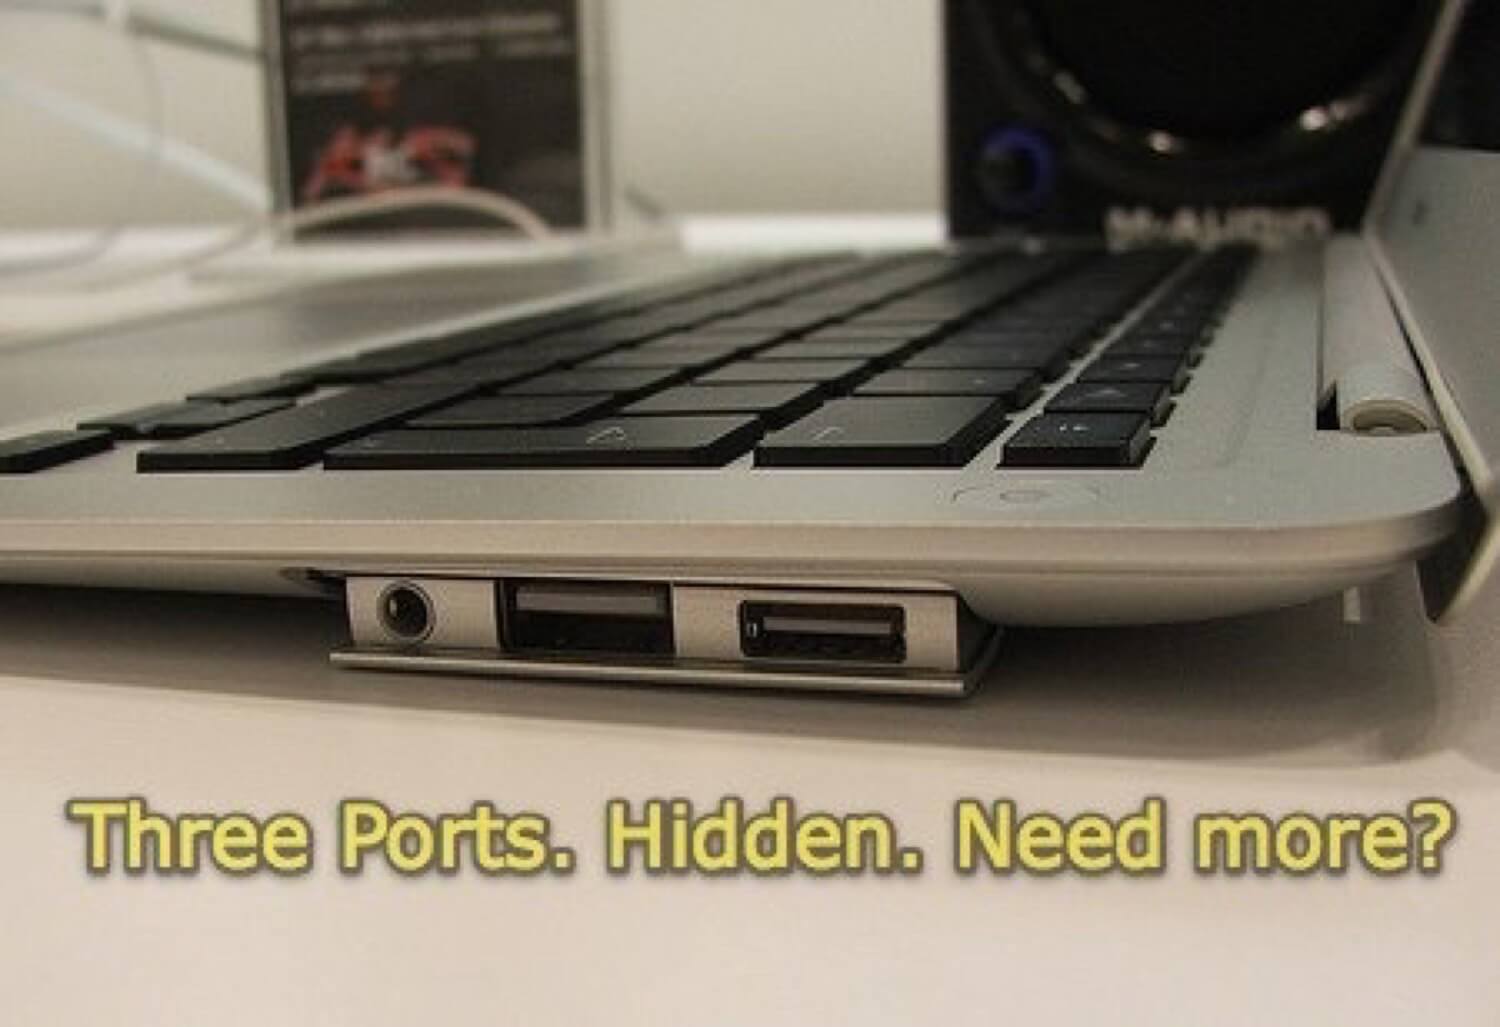 Macbook Air rocks. 5 things PC notebook manufacturers will never understand. 9